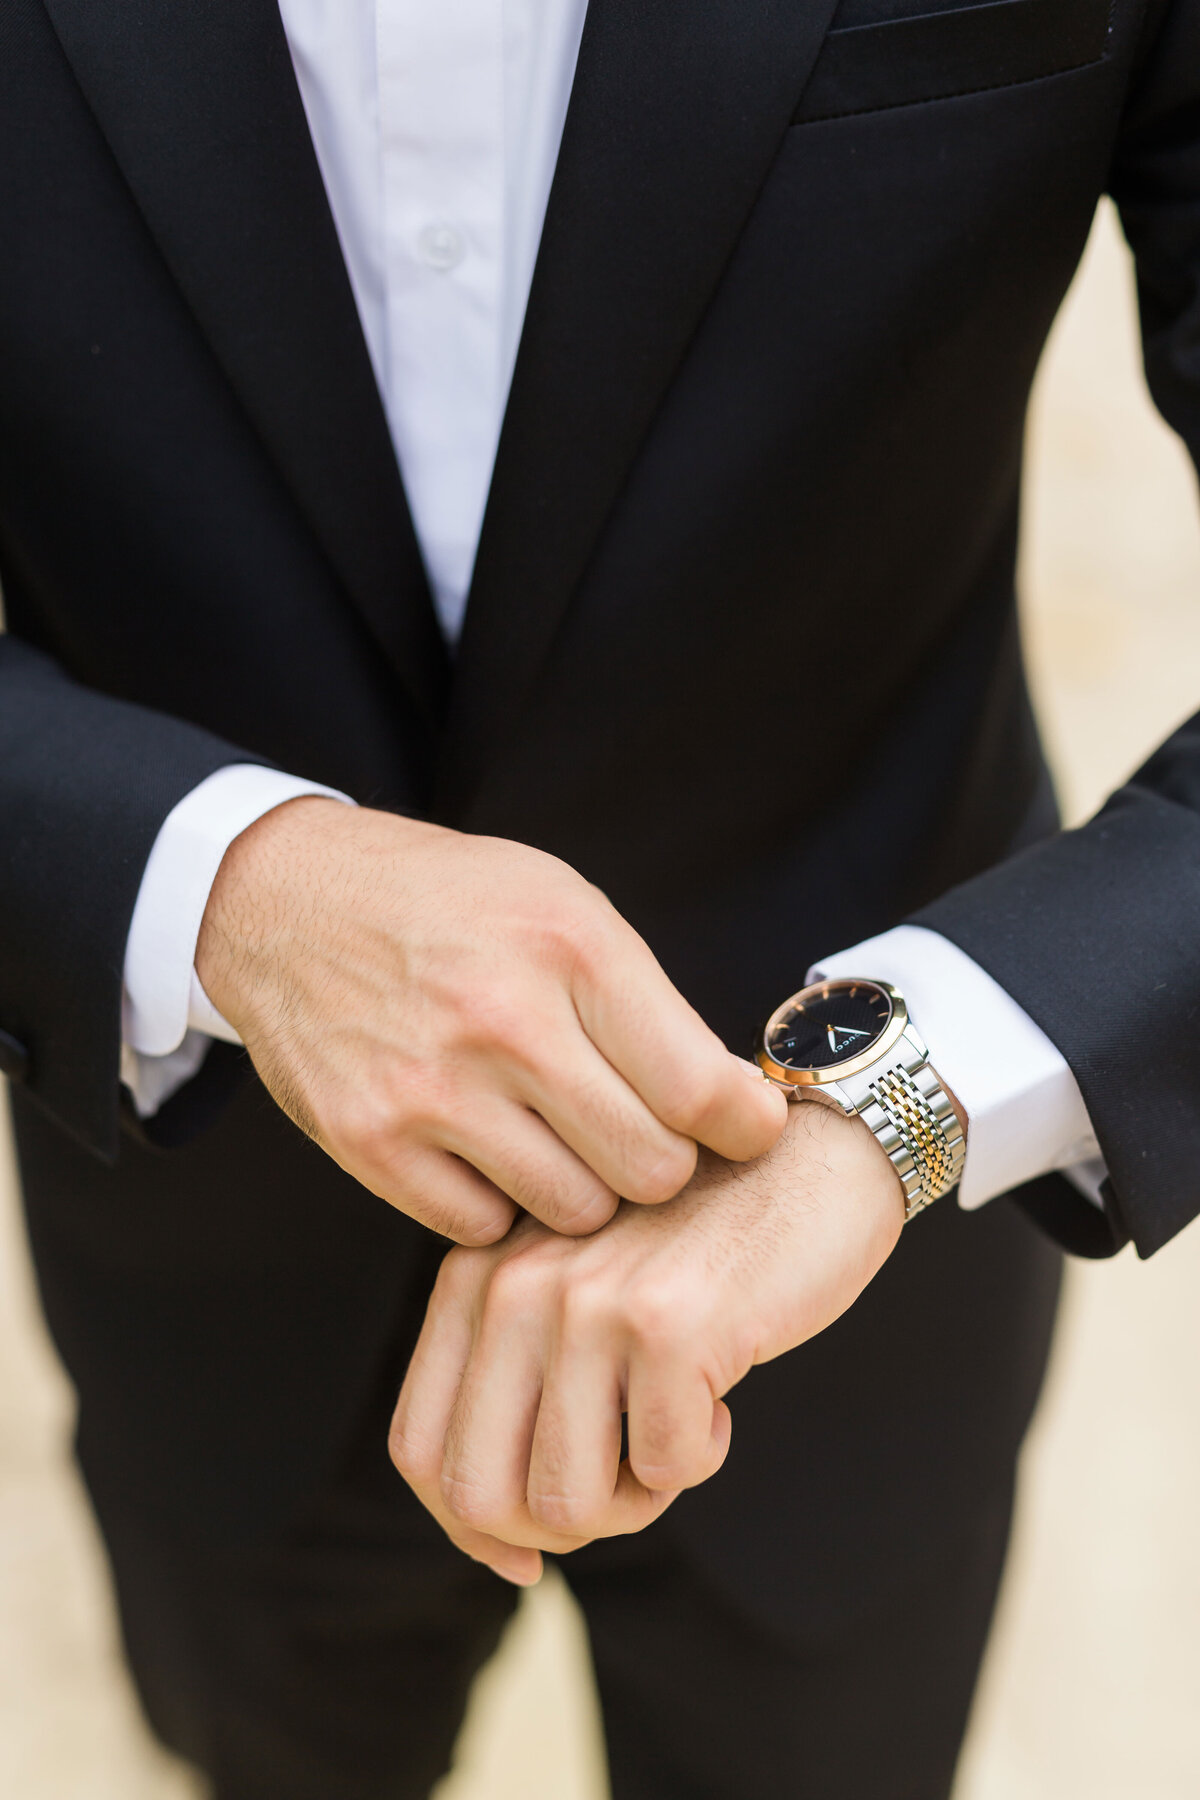 Close up of groom's watch and cuffs on his wedding day